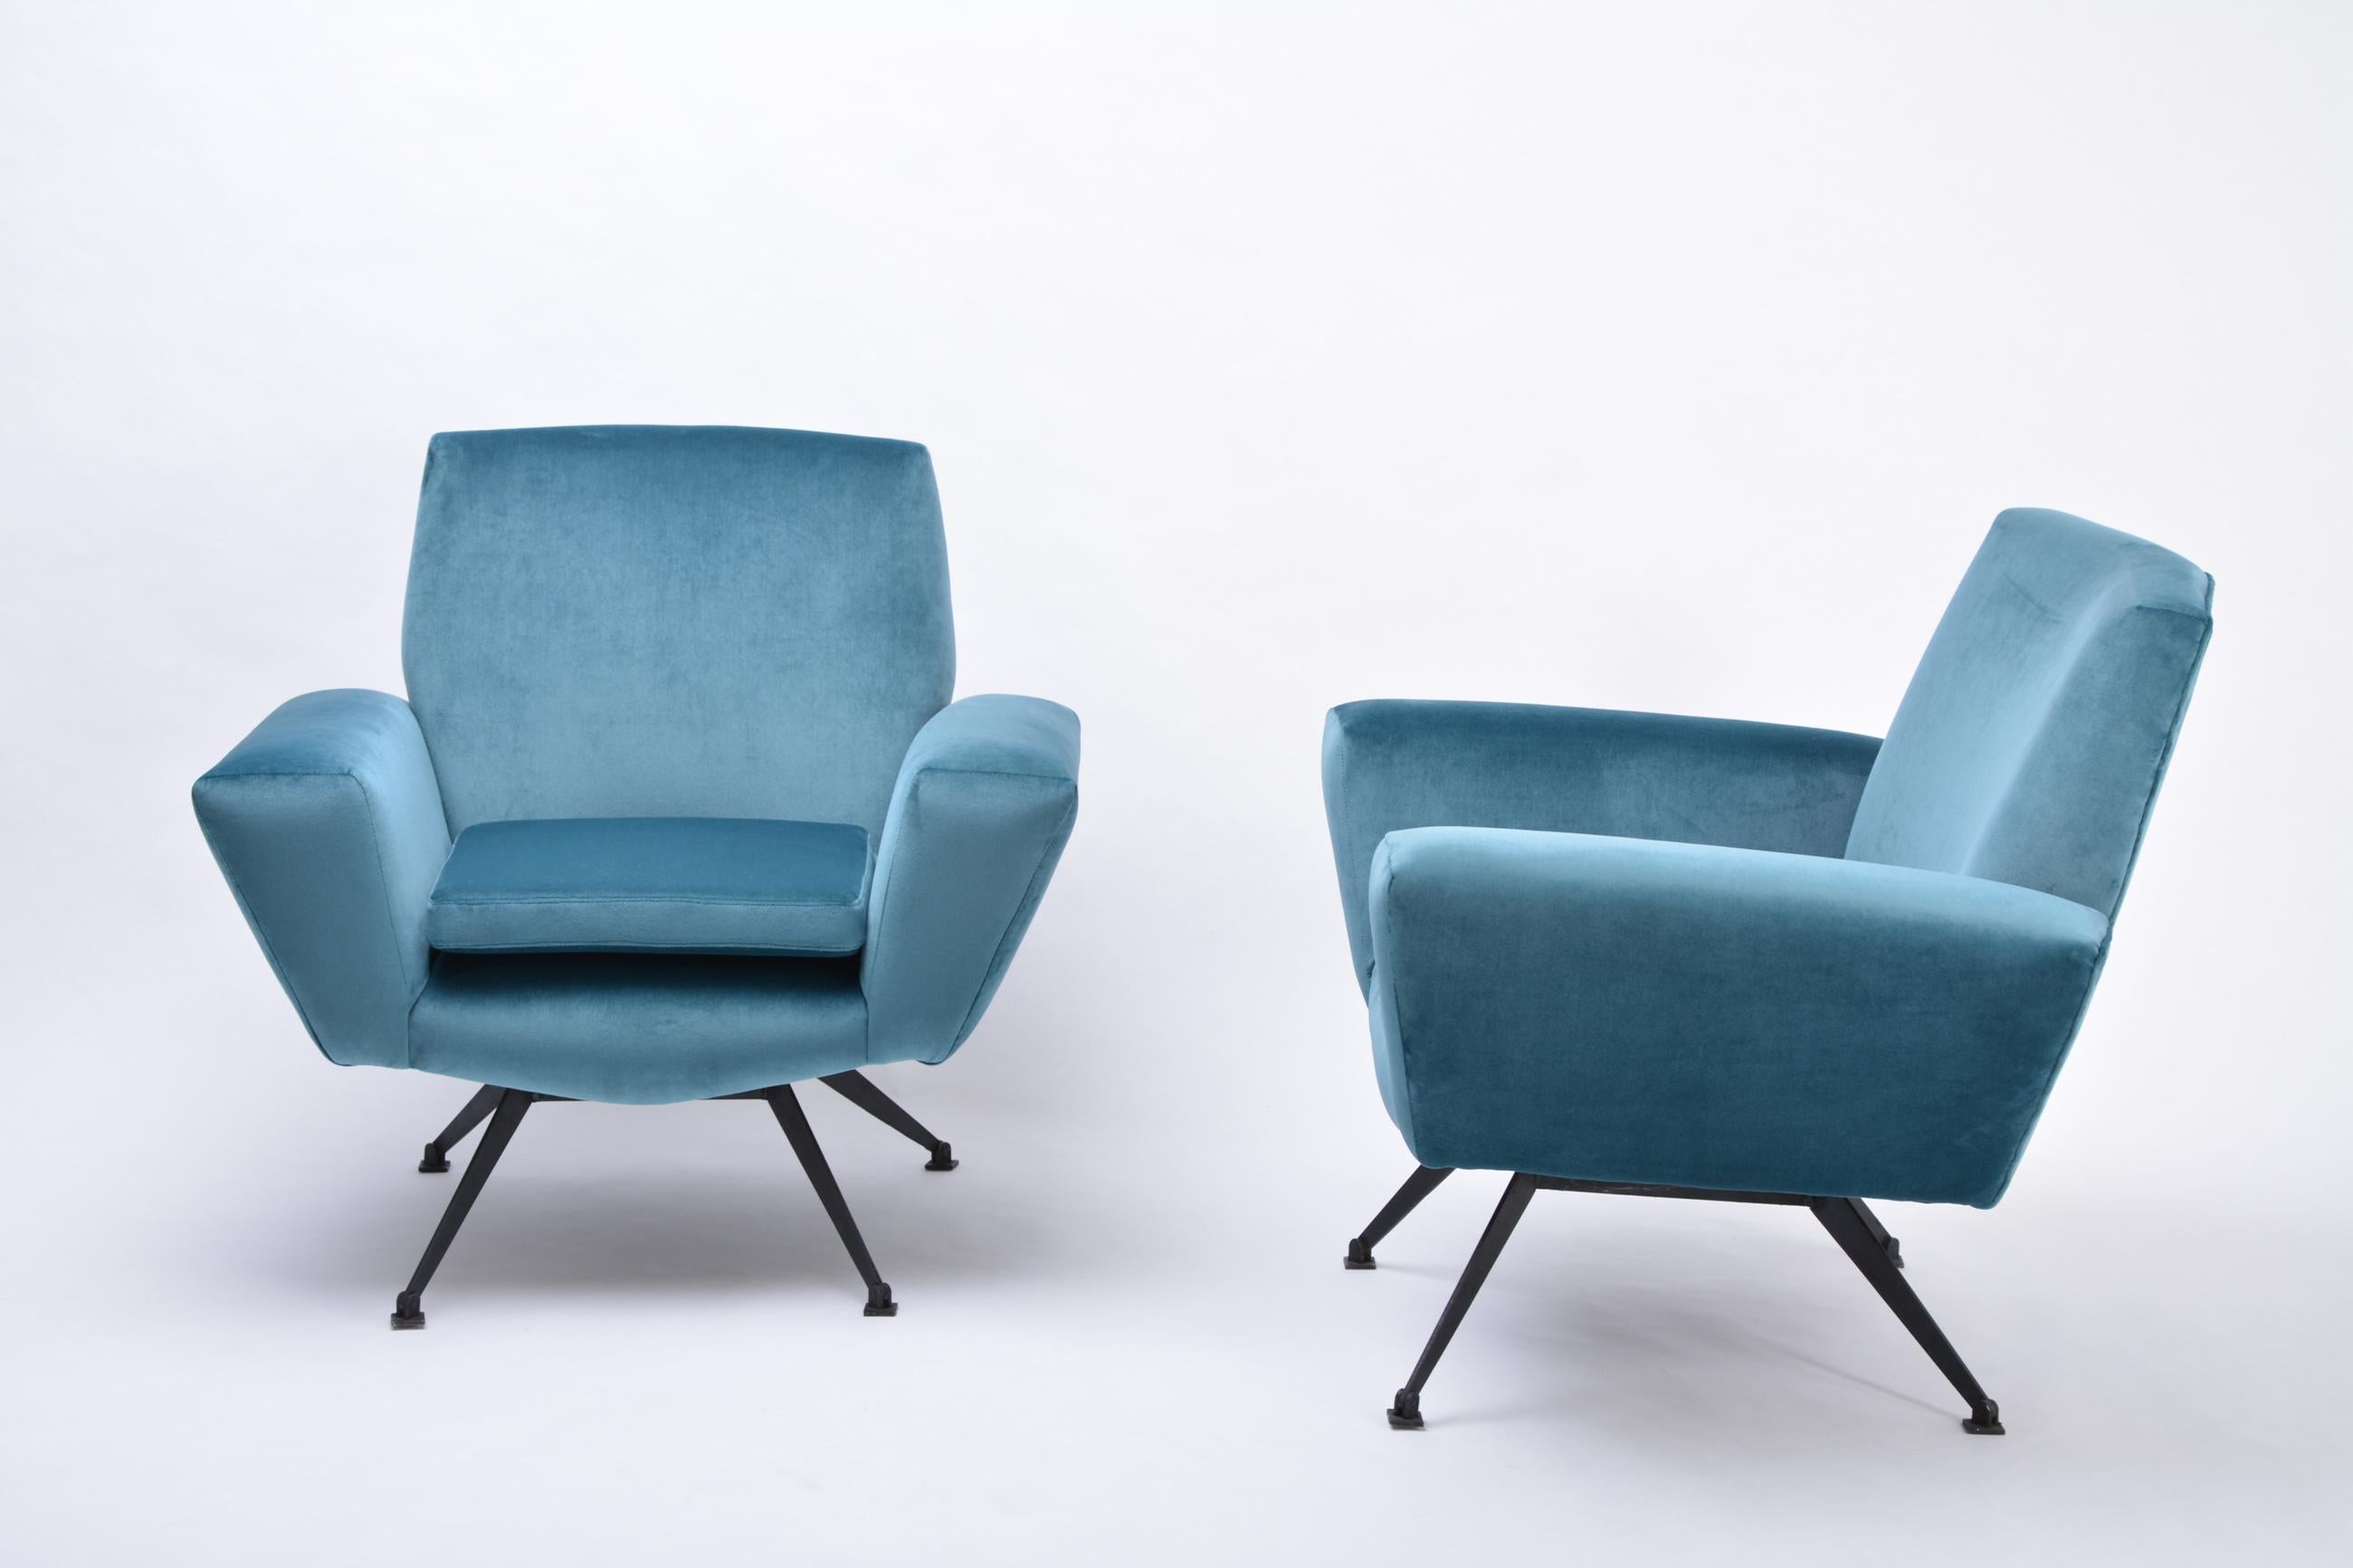 Set of Two Blue Reupholstered Italian Mid-Century Modern Lounge Chairs by Lenzi 1